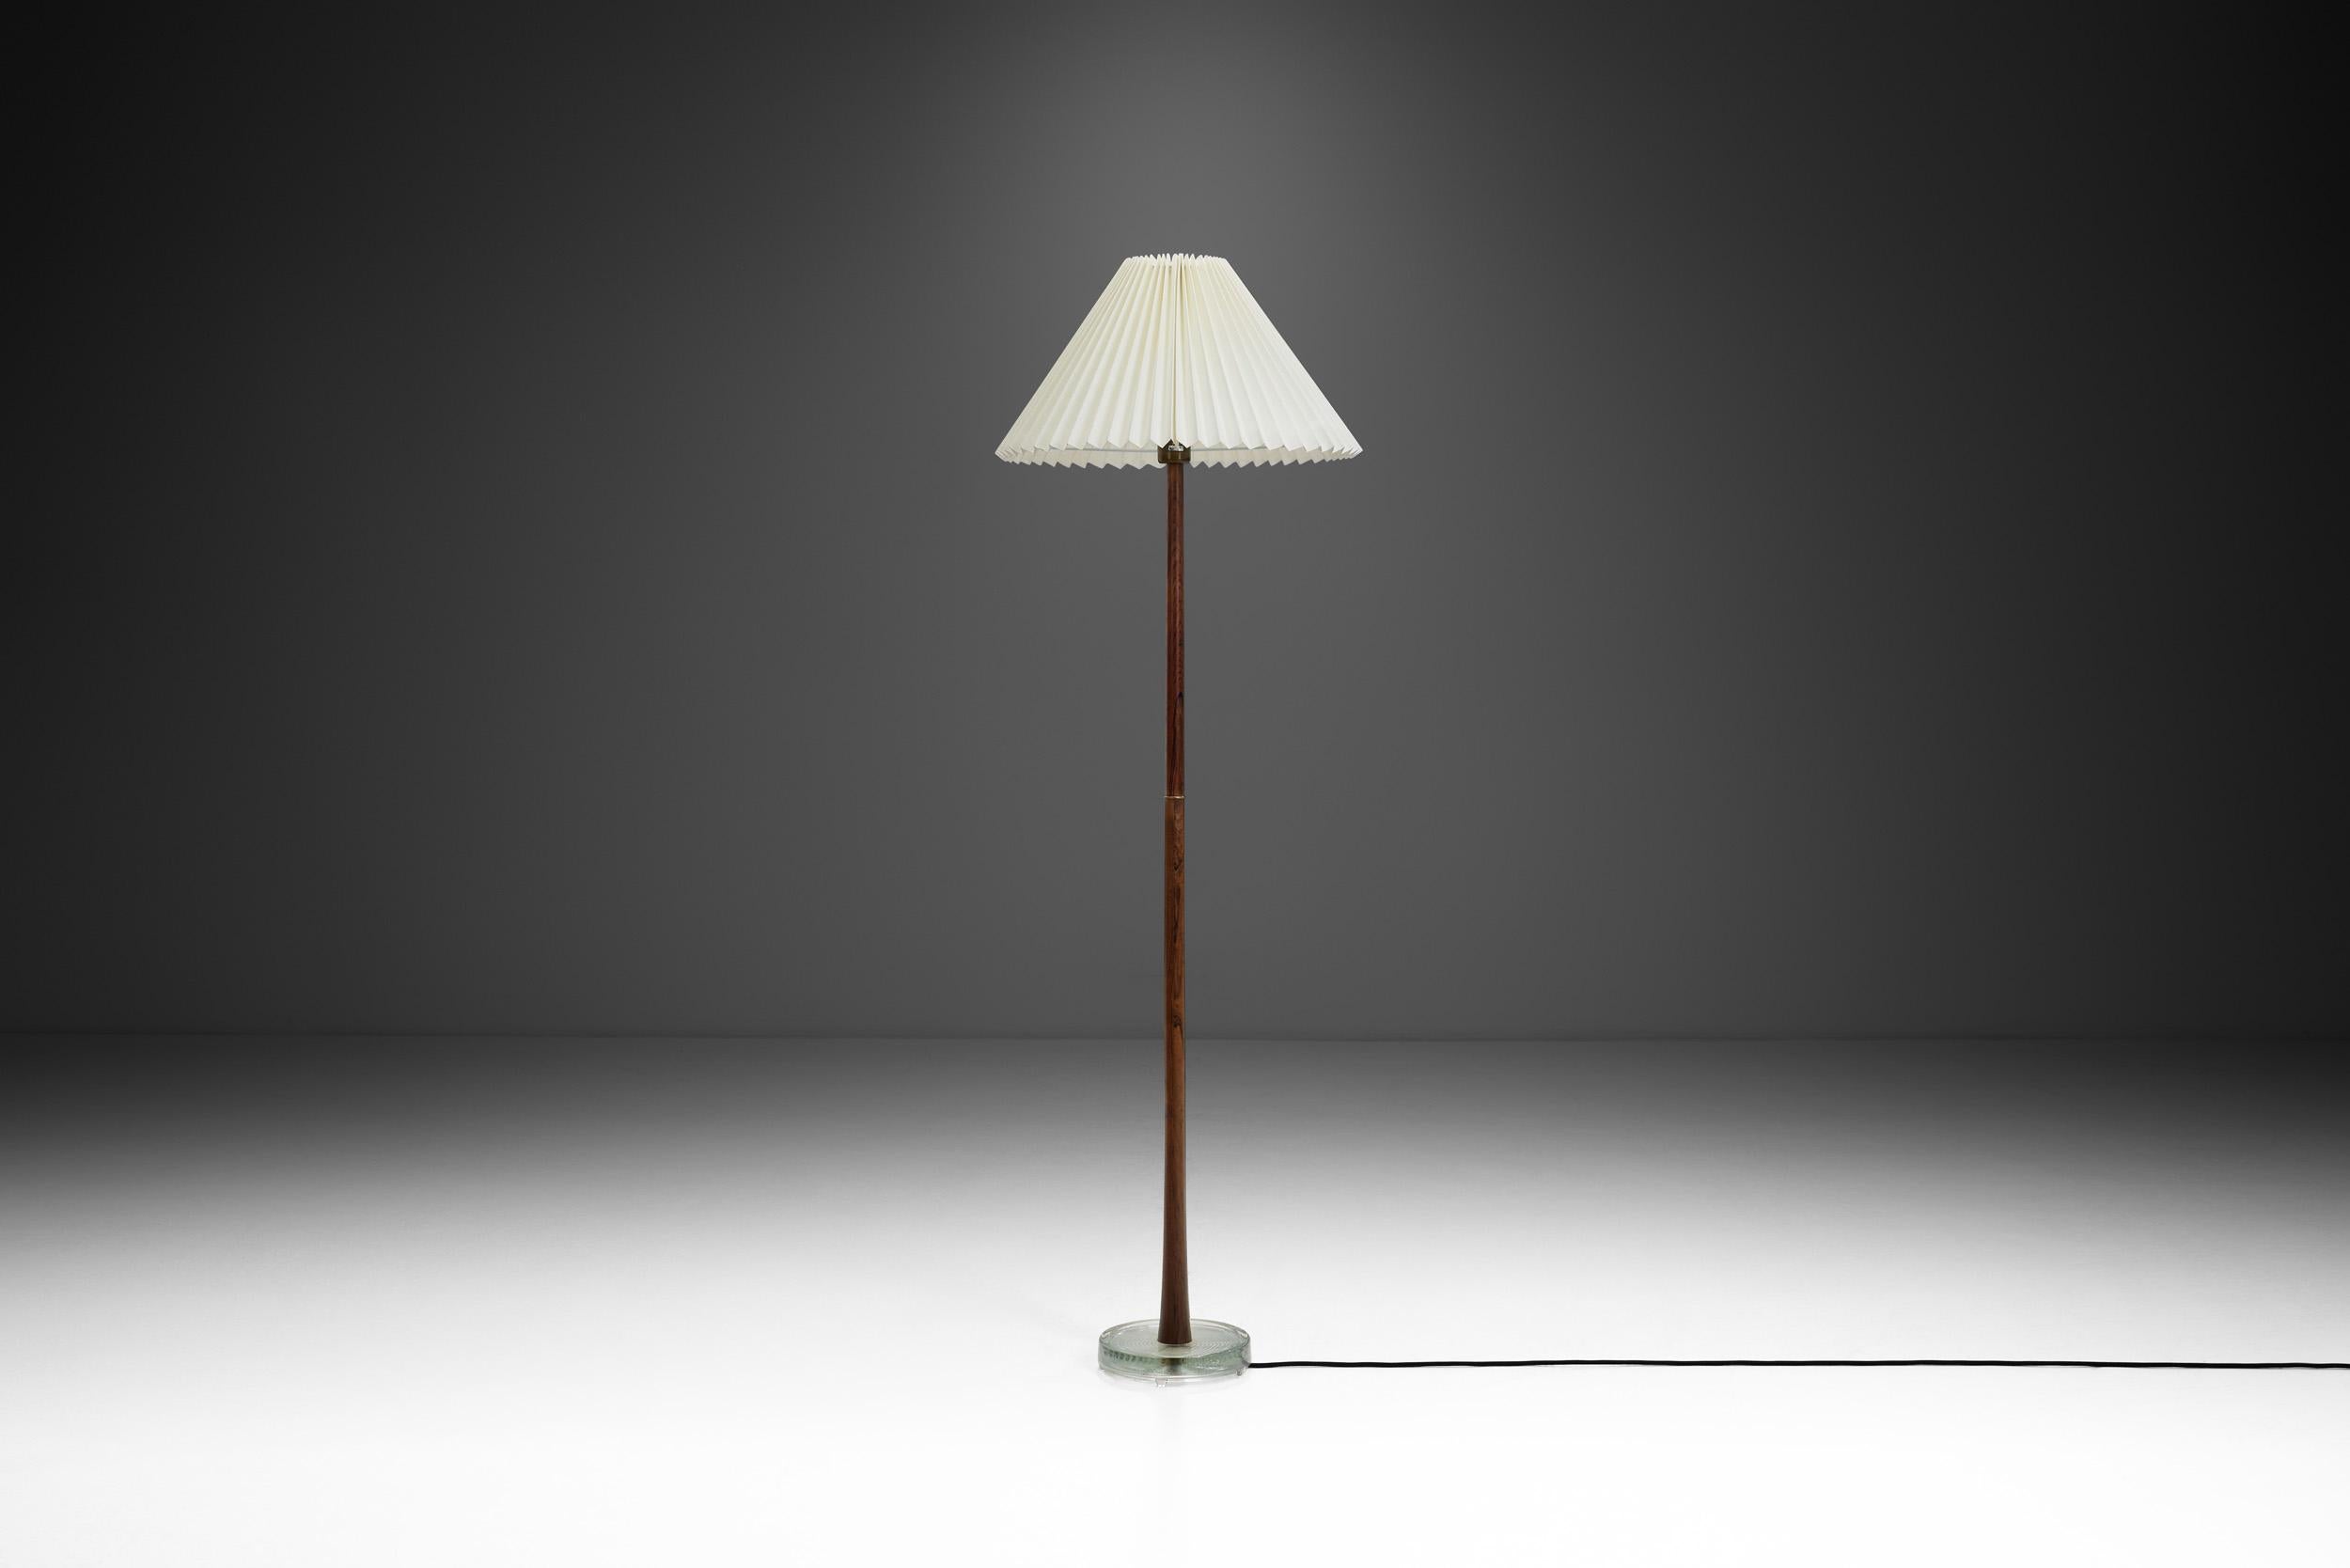 Mid-Century Modern Floor Lamp with Ruched Shade, Scandinavia ca 1950s